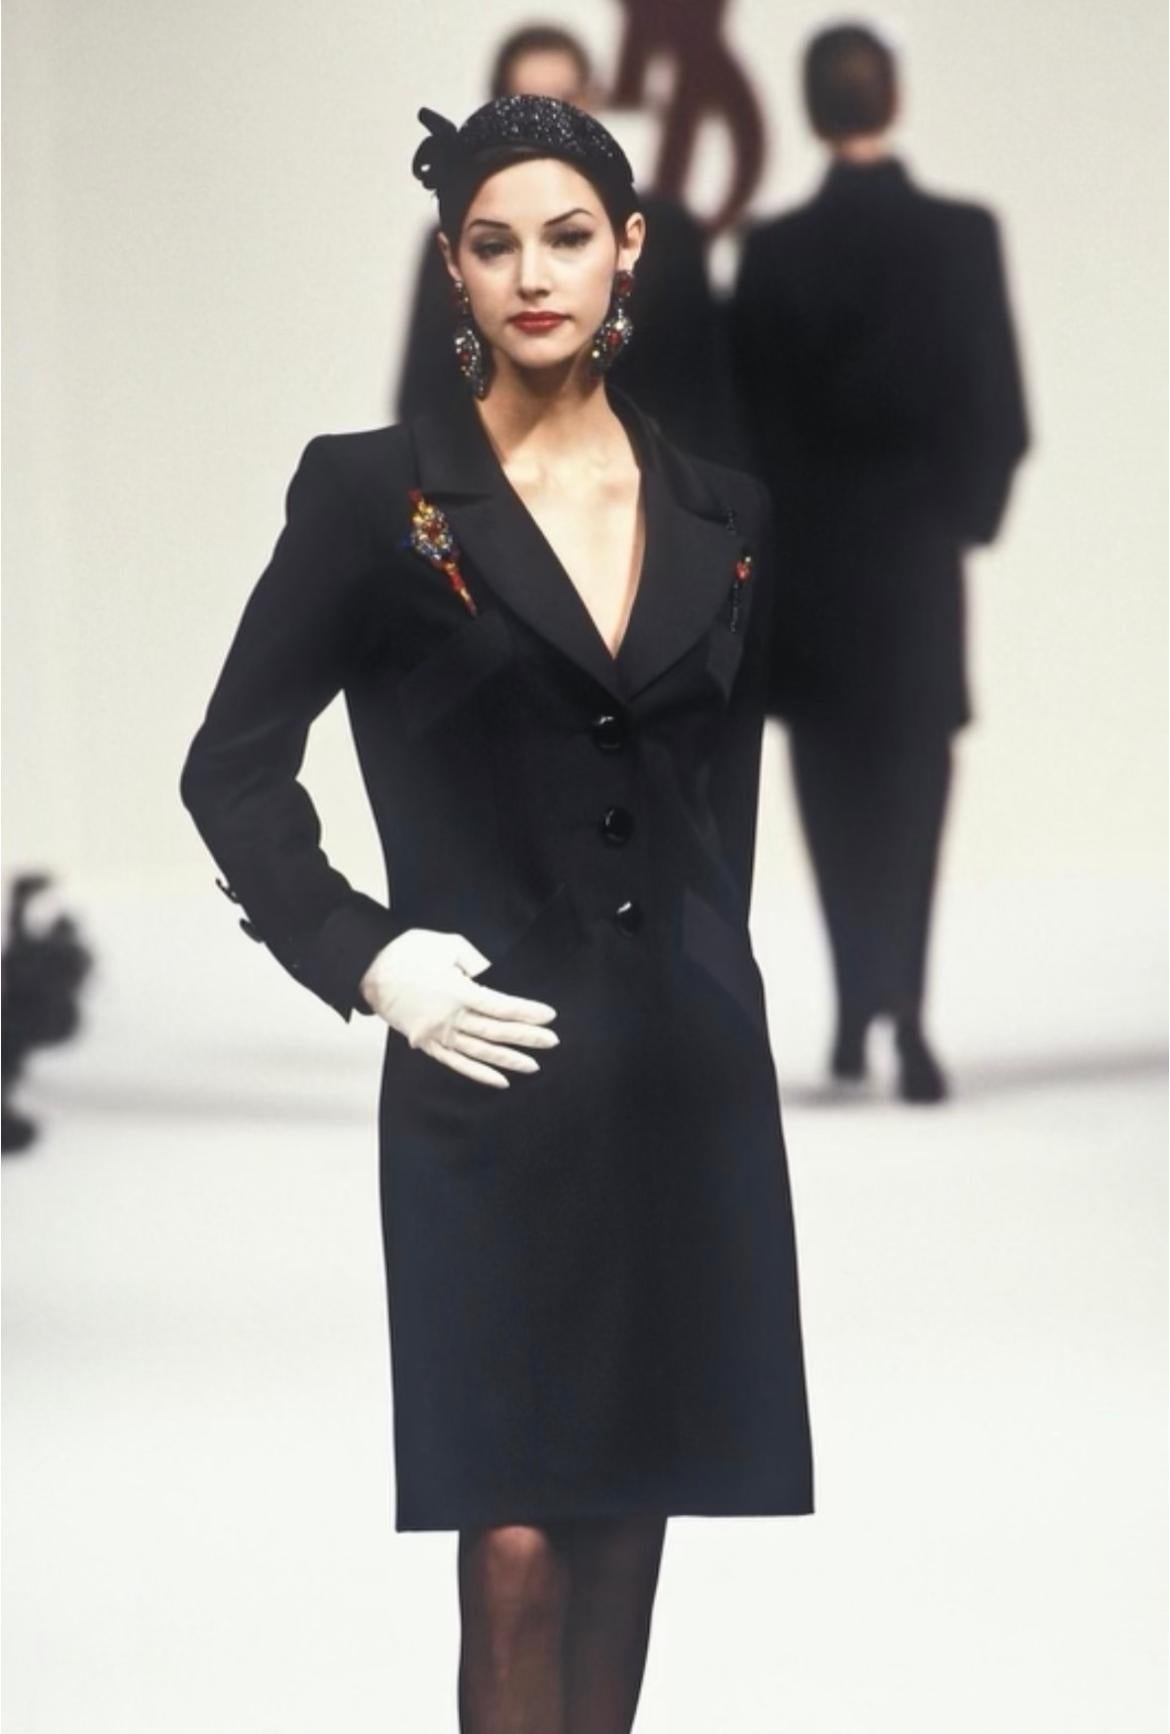 Presenting a fabulous Yves Saint Laurent Rive Gauche blazer dress. From the Fall/Winter 1993 collection, this dress debuted on the season's runway. This chic dress features a fold-over collar, button-down closure, and pockets at the bust/hips. The